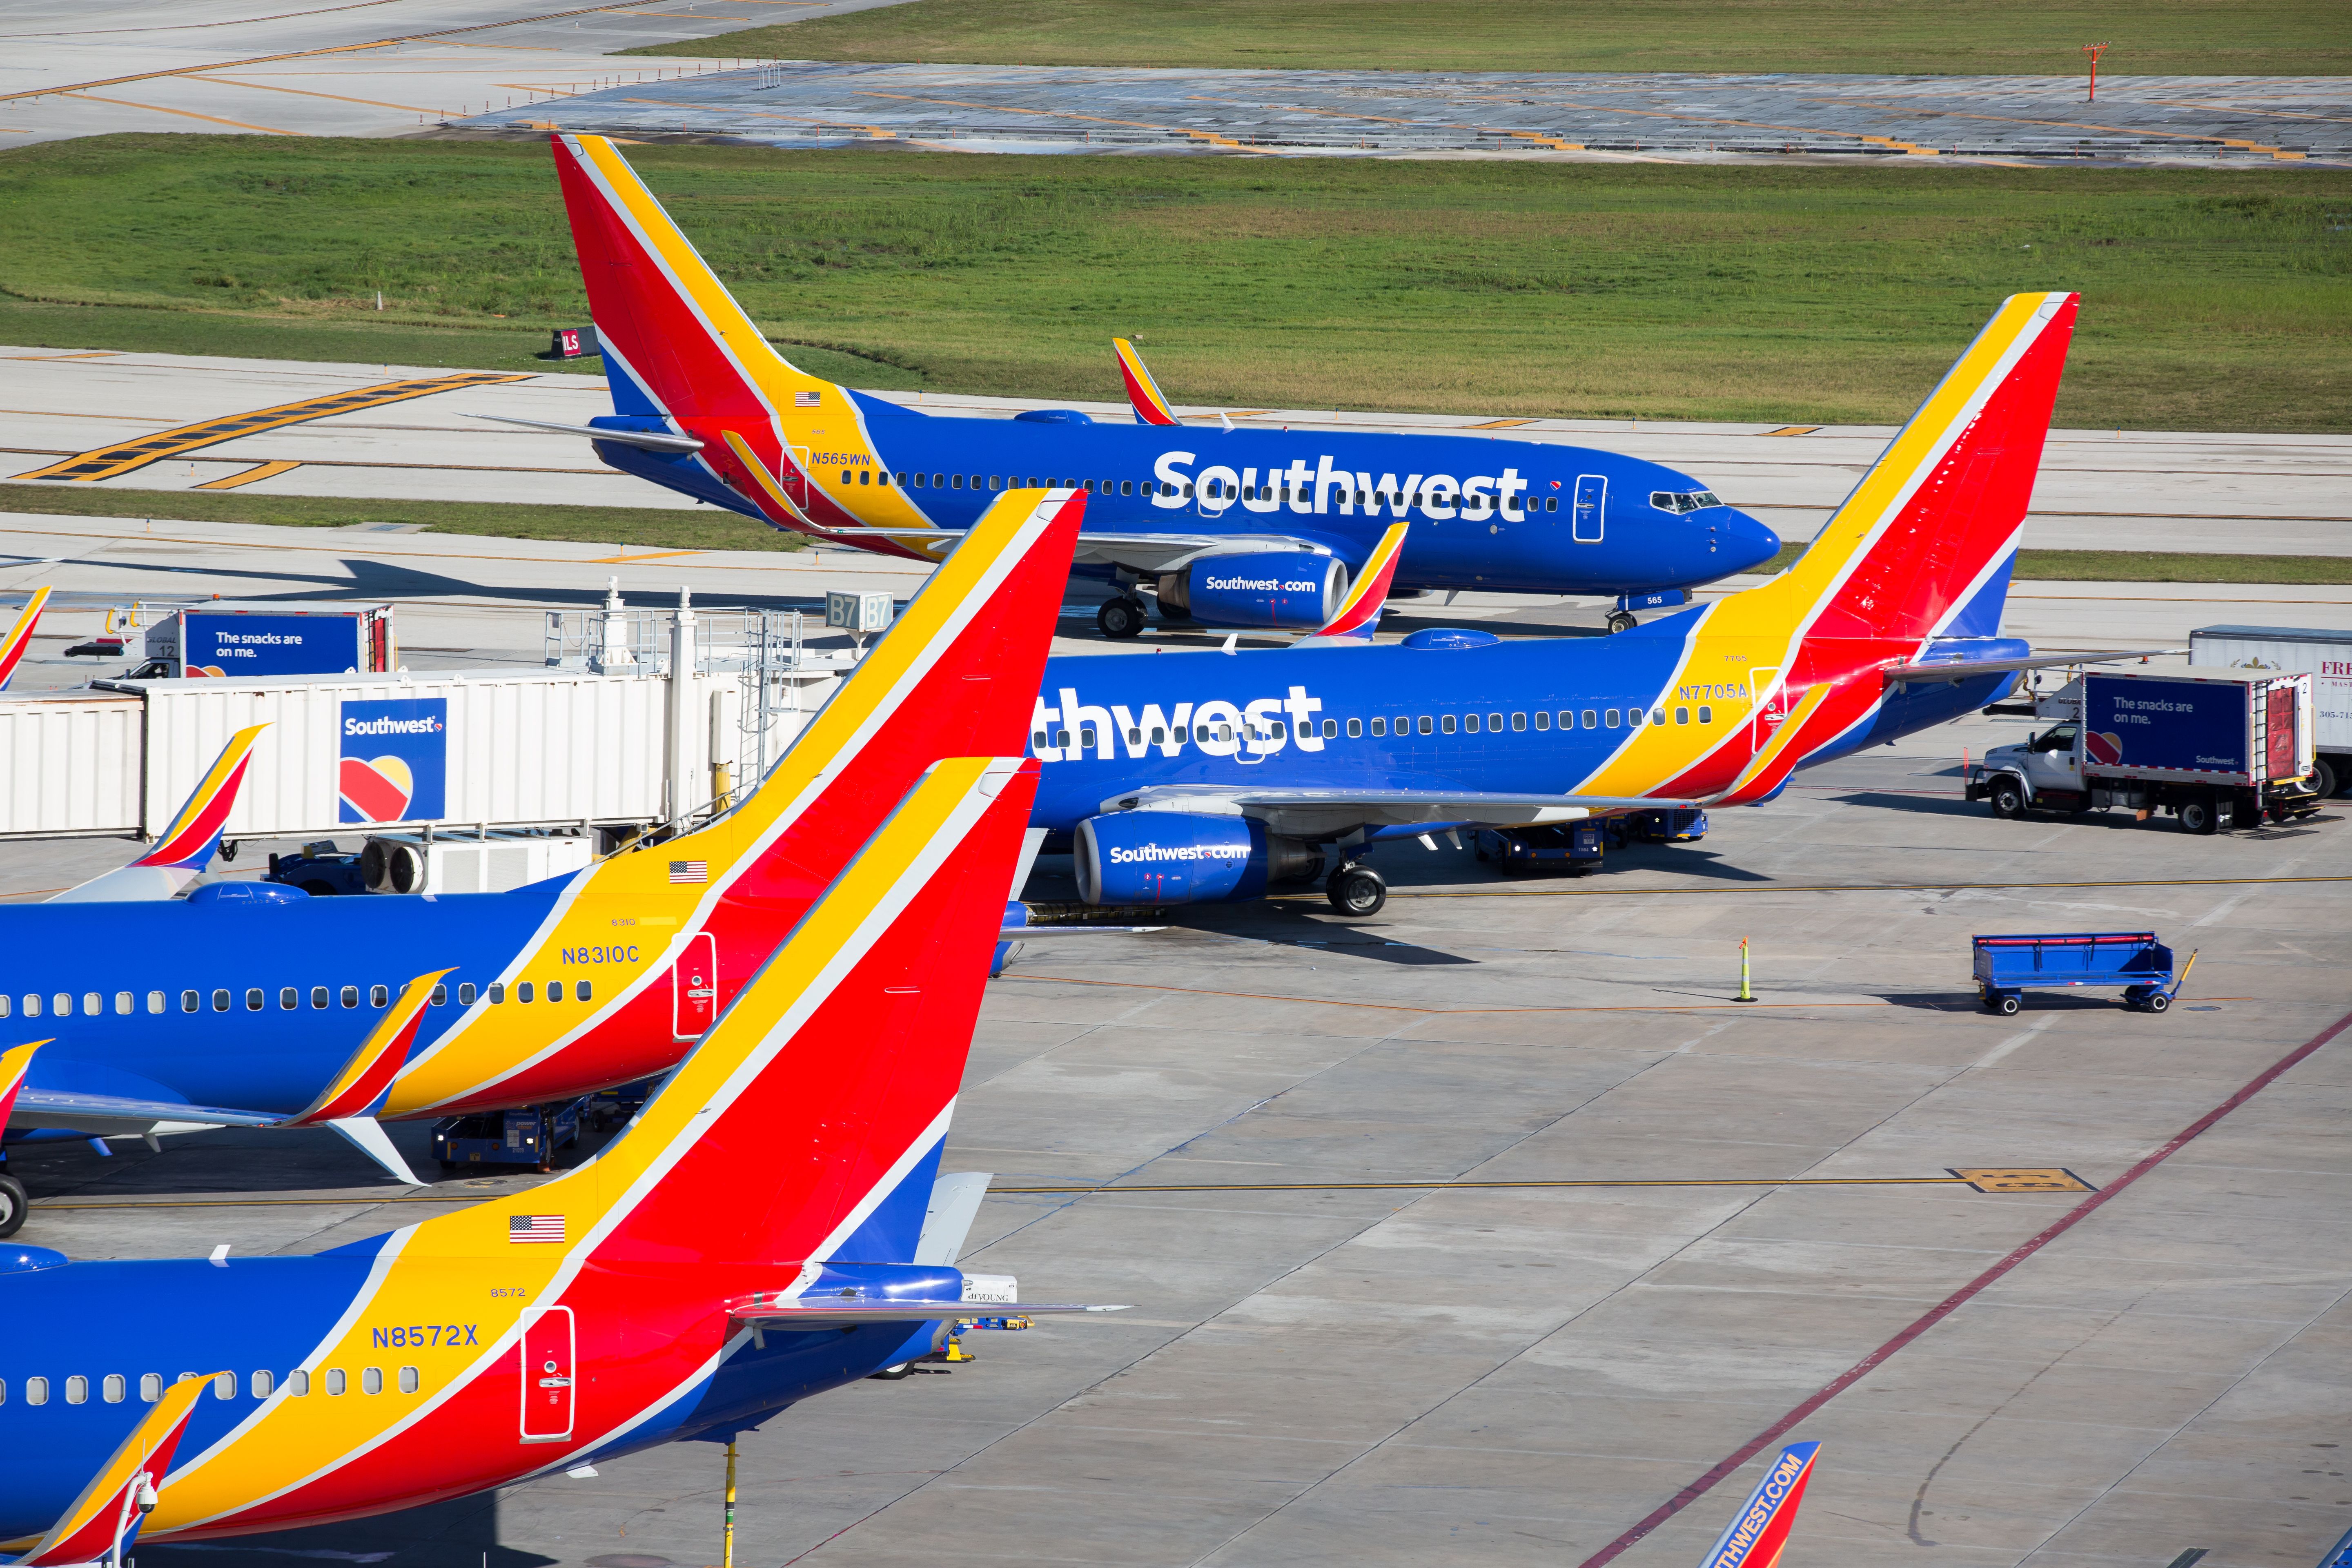 Several Southwest Airlines aircraft on an airport apron.